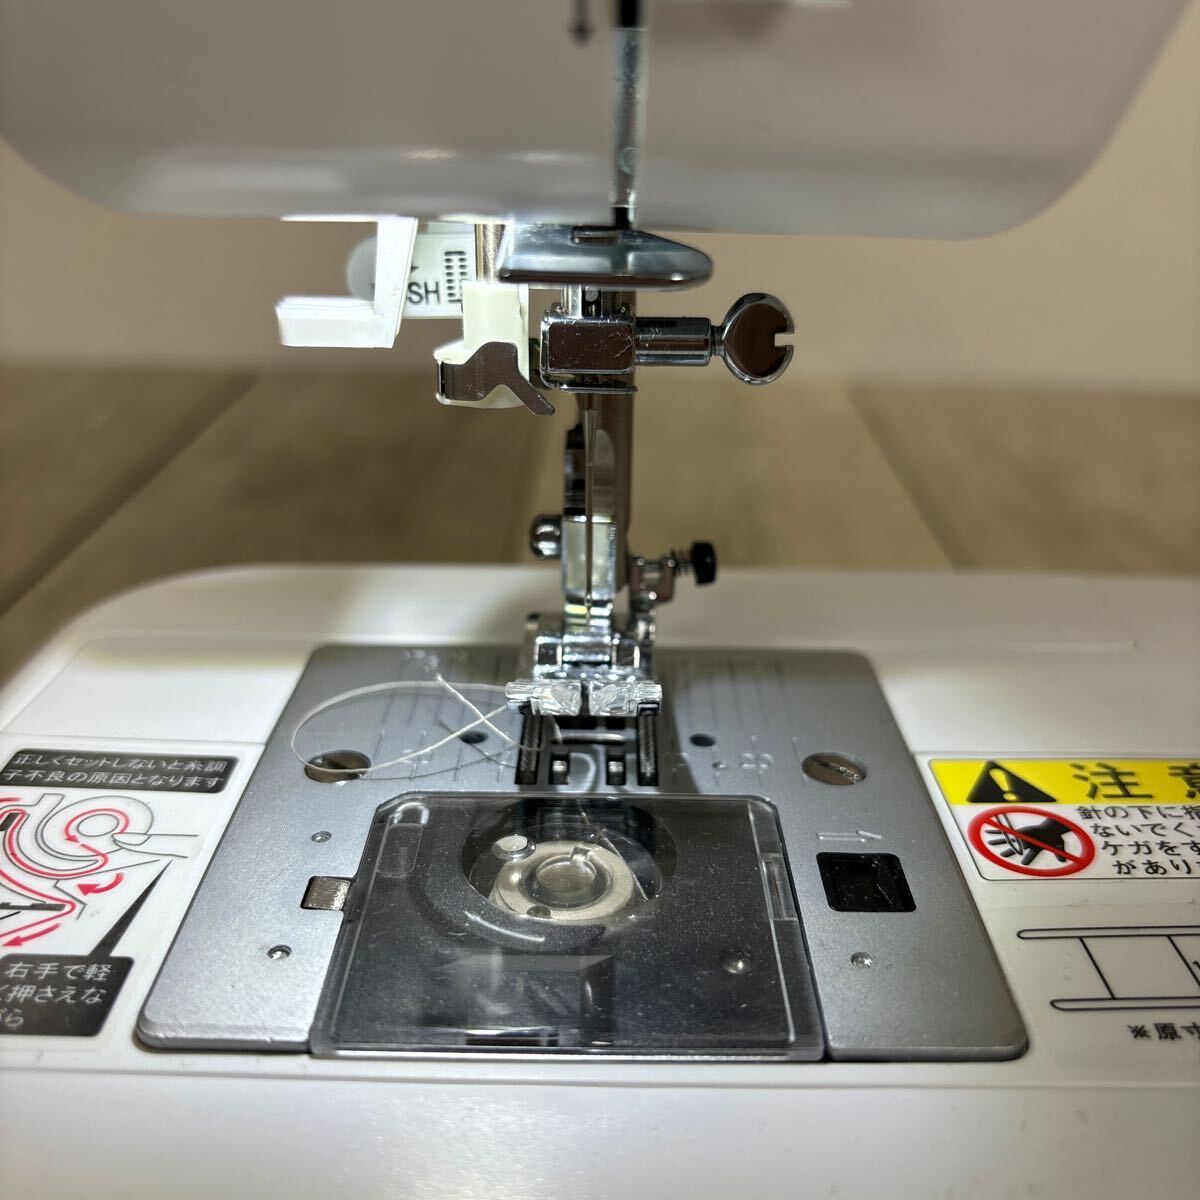 213 SINGER computer sewing machine SP-07N singer character .. sewing hand made go in . preparation handicraft 